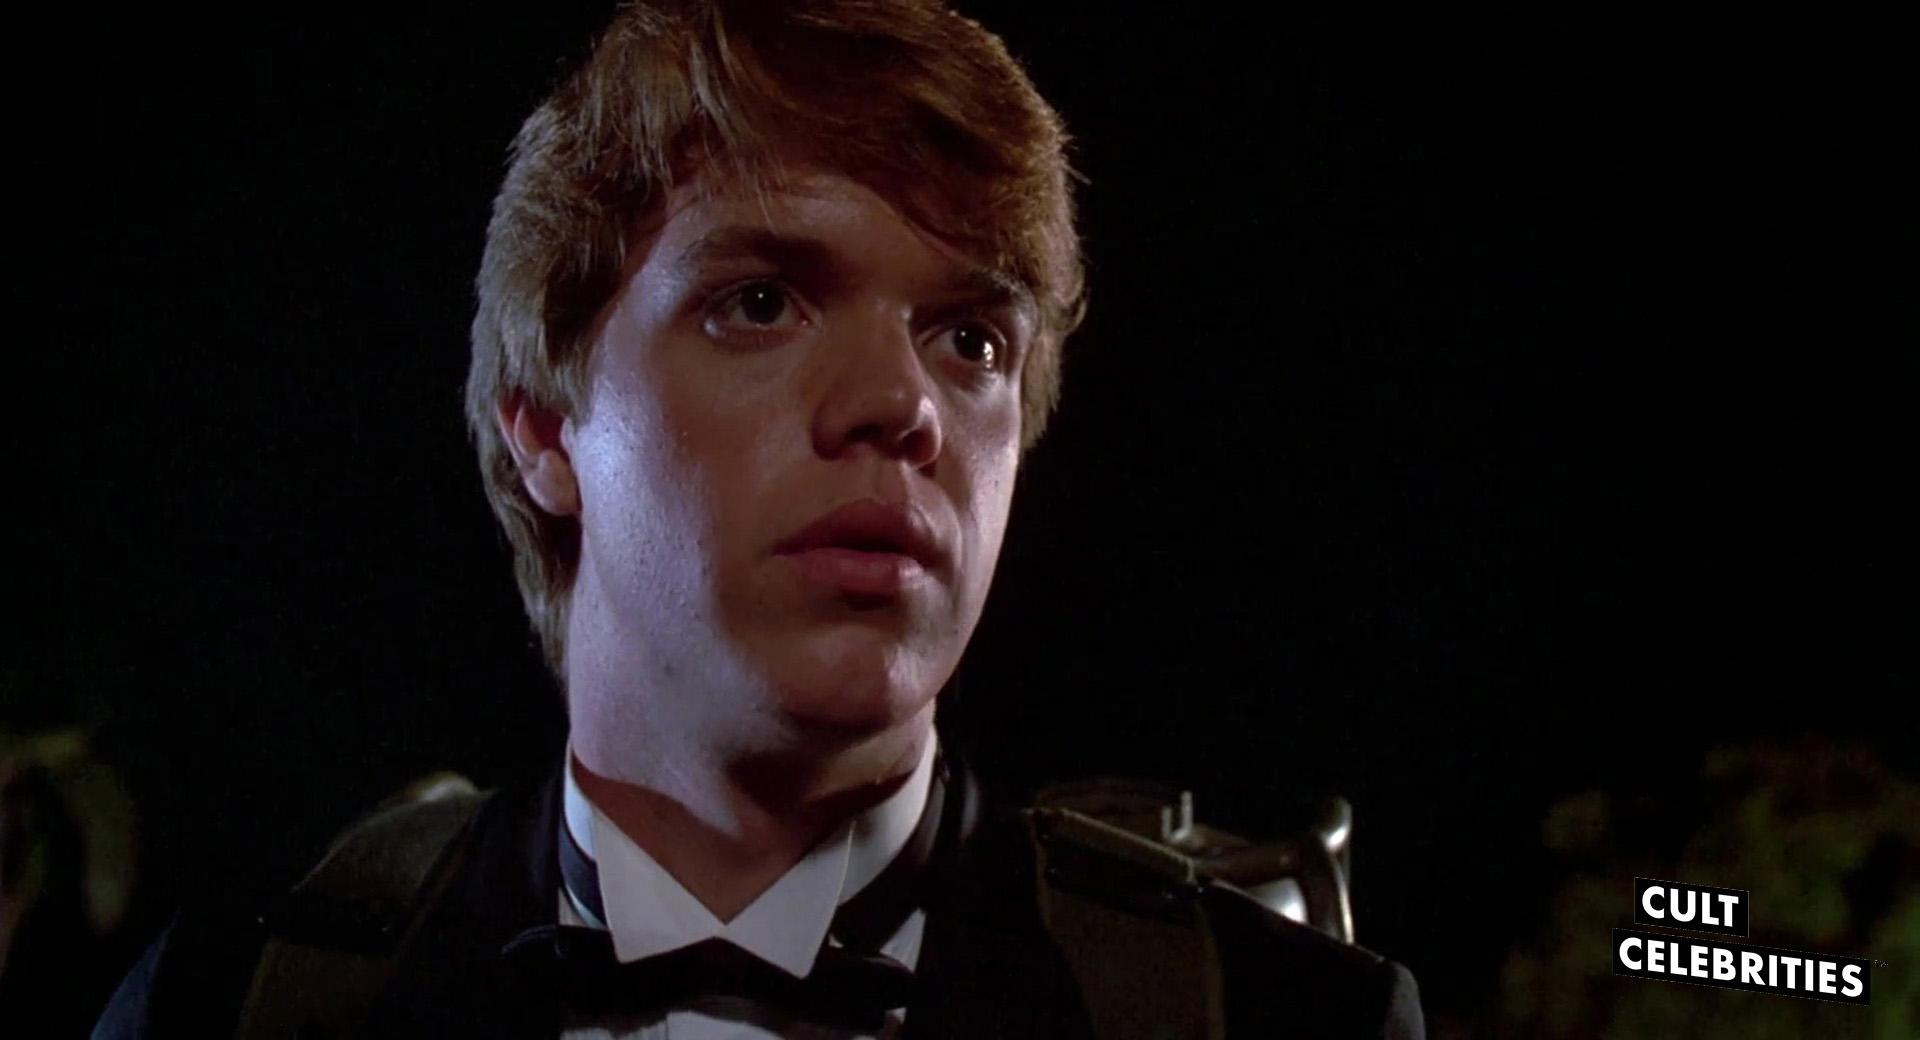 Jason Lively in Night of the Creeps (1986)